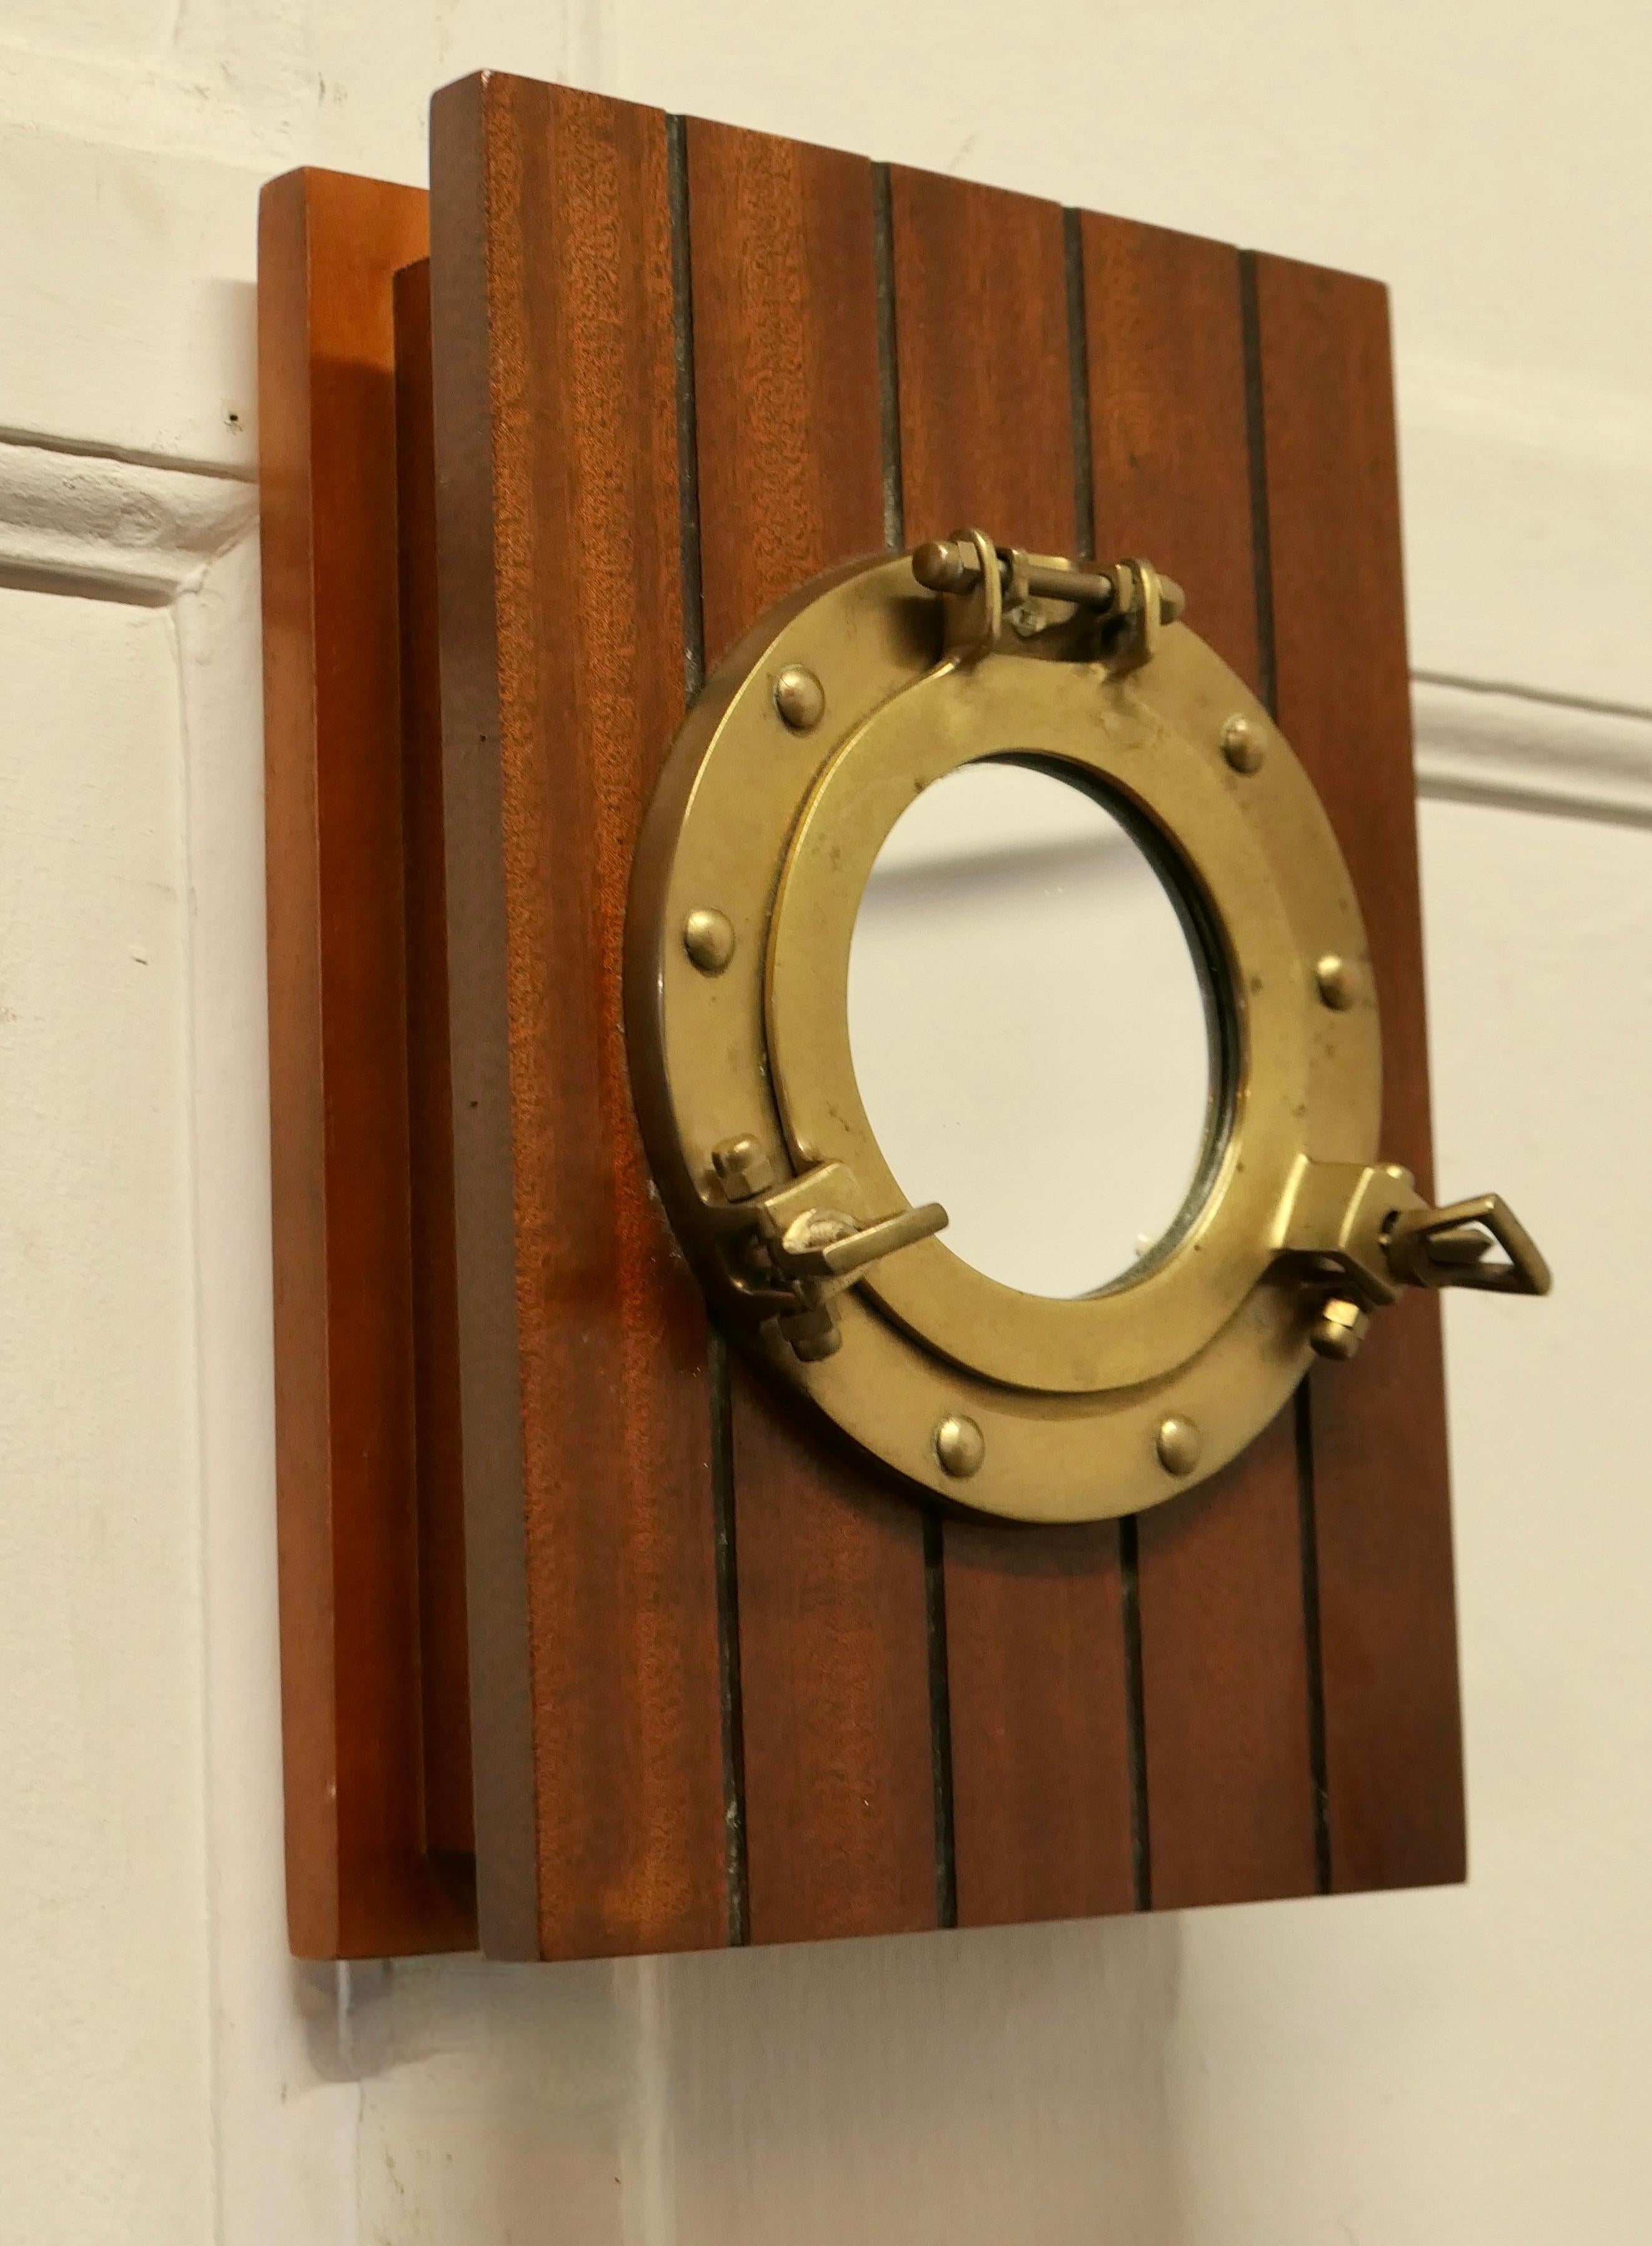 Nautical Design Hotel Reception Key Cupboard  

This is a Solid Teak Key cupboard with a mirrored brass porthole on the front of the door. The cupboard has 5 key hooks inside and there is room for more if needed
The cupboard is in good condition, it